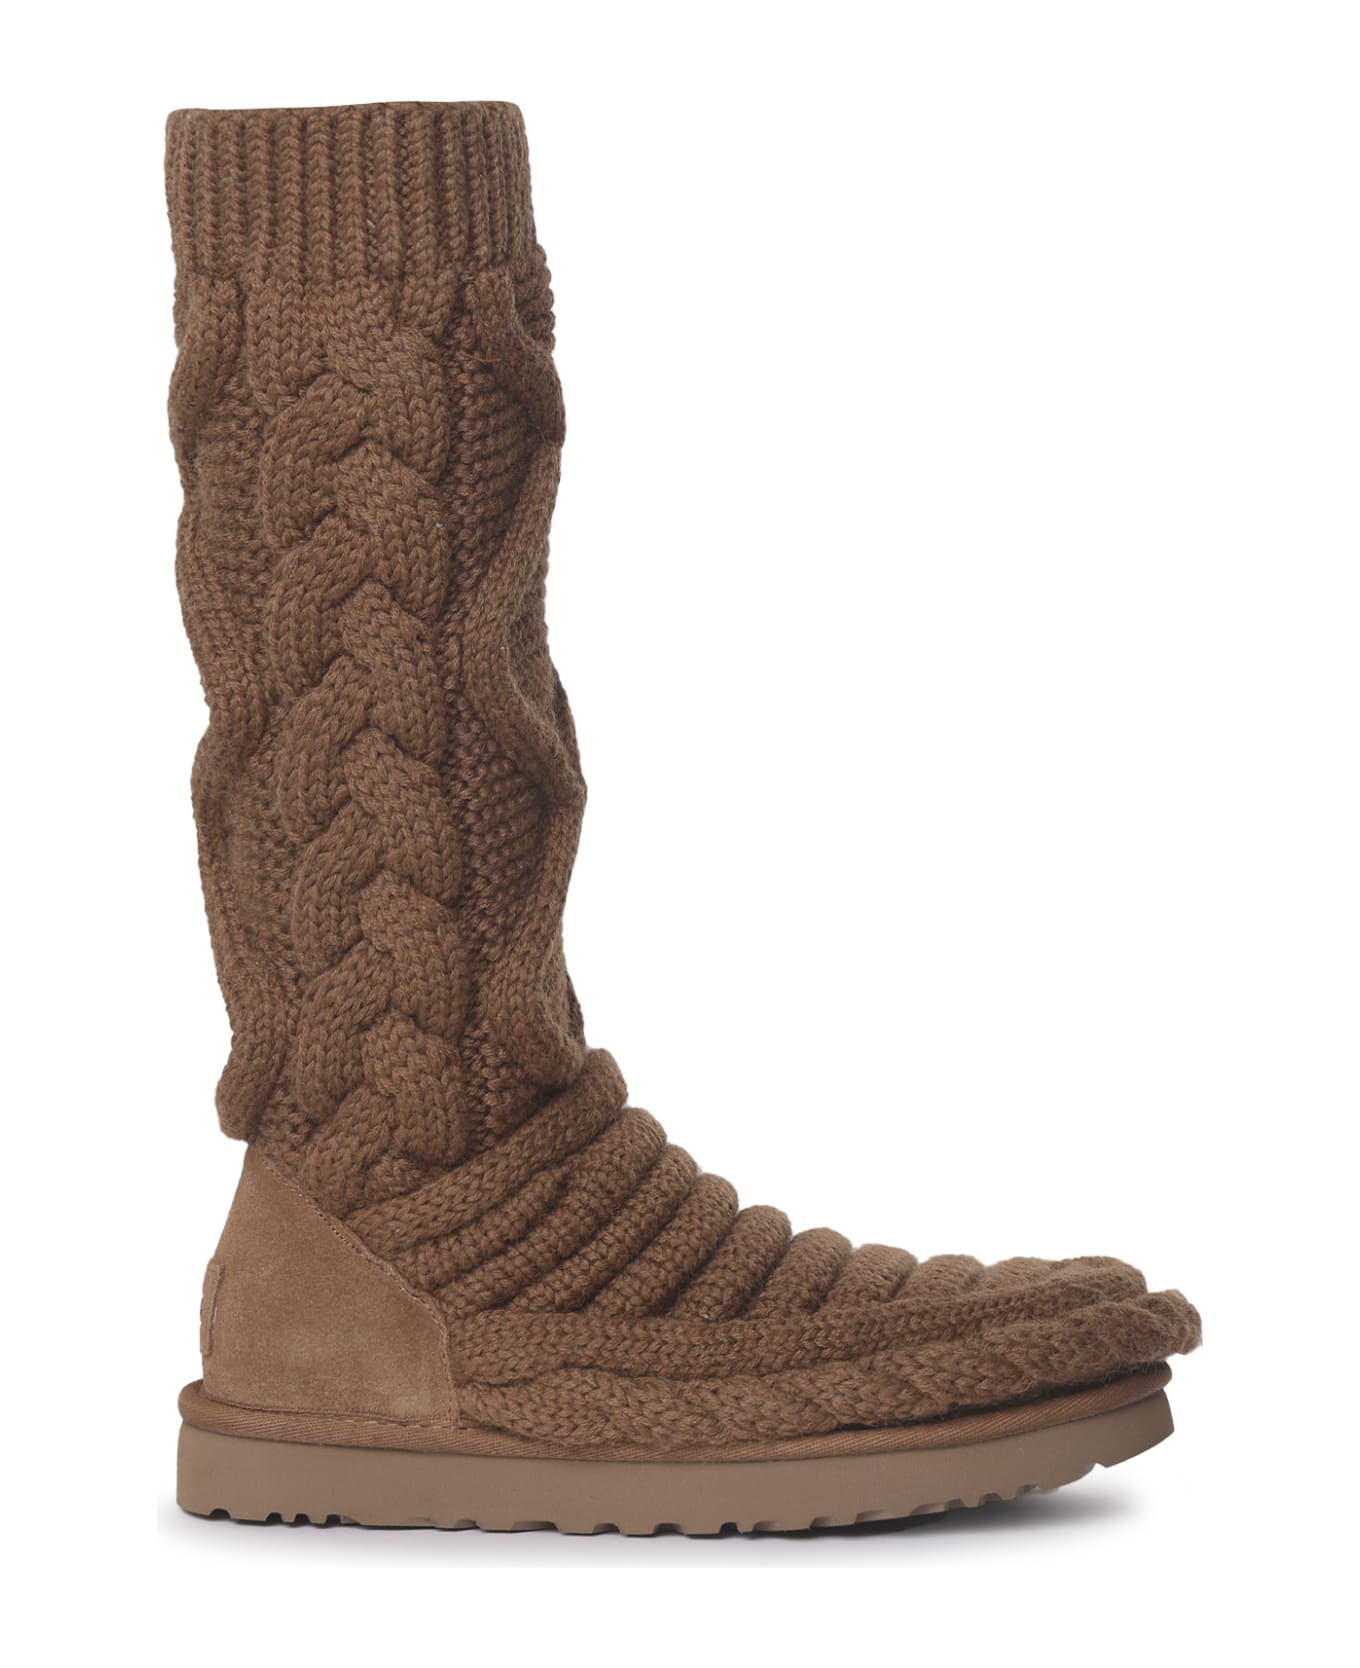 UGG Classic Tall Chunky Knit Boots - Chestnut